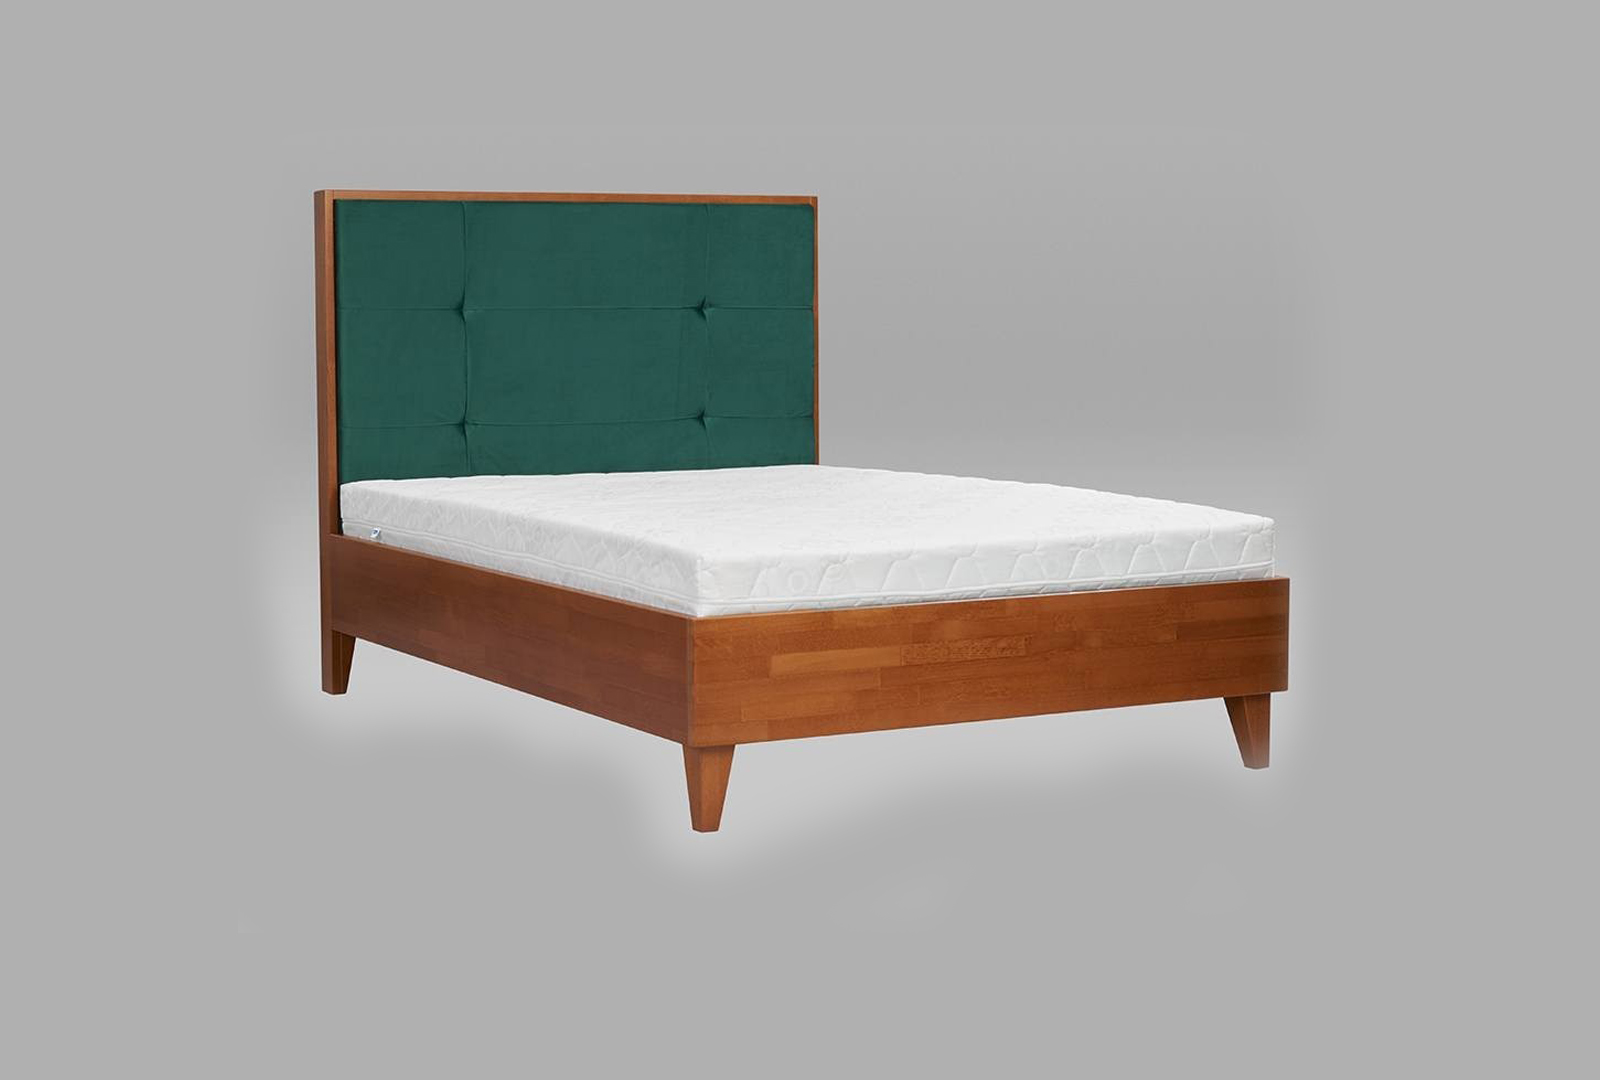 VISBY FRIDA WOODEN BEECH BED WITH A HIGH HEADBOARD